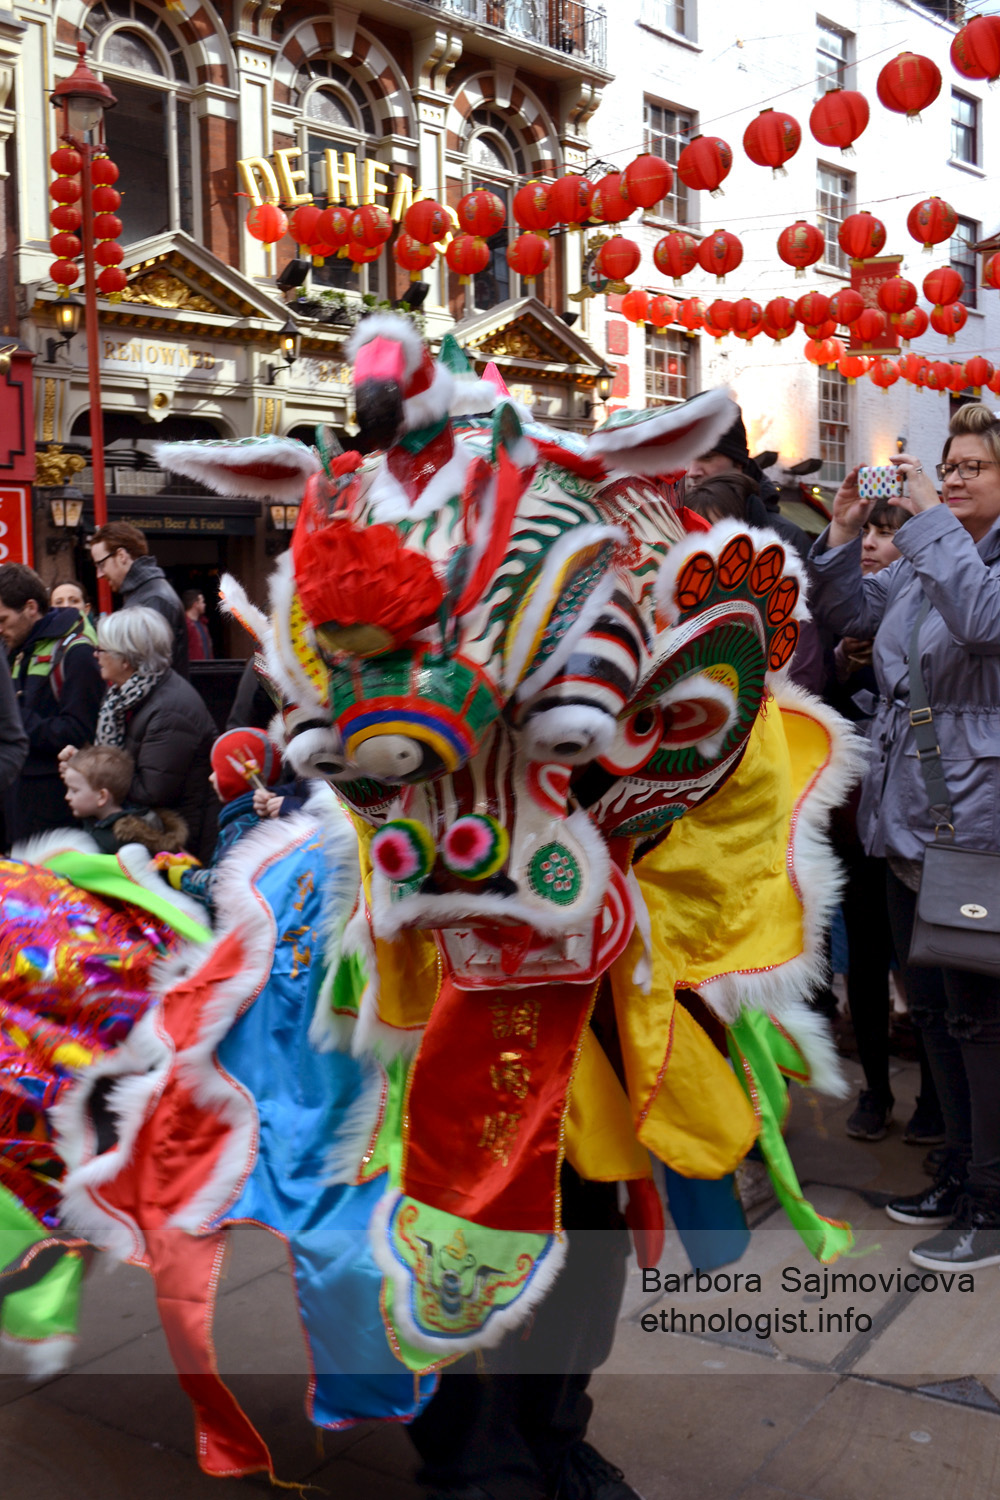 Traditional celebration of Chinese New Year in Chinatown in London. The dragon visited houses and shops, danced in front of them and wished all the best for the Chinese New Year of the Fire Monkey. Photo: Barbora Sajmovicova, 2016, London.